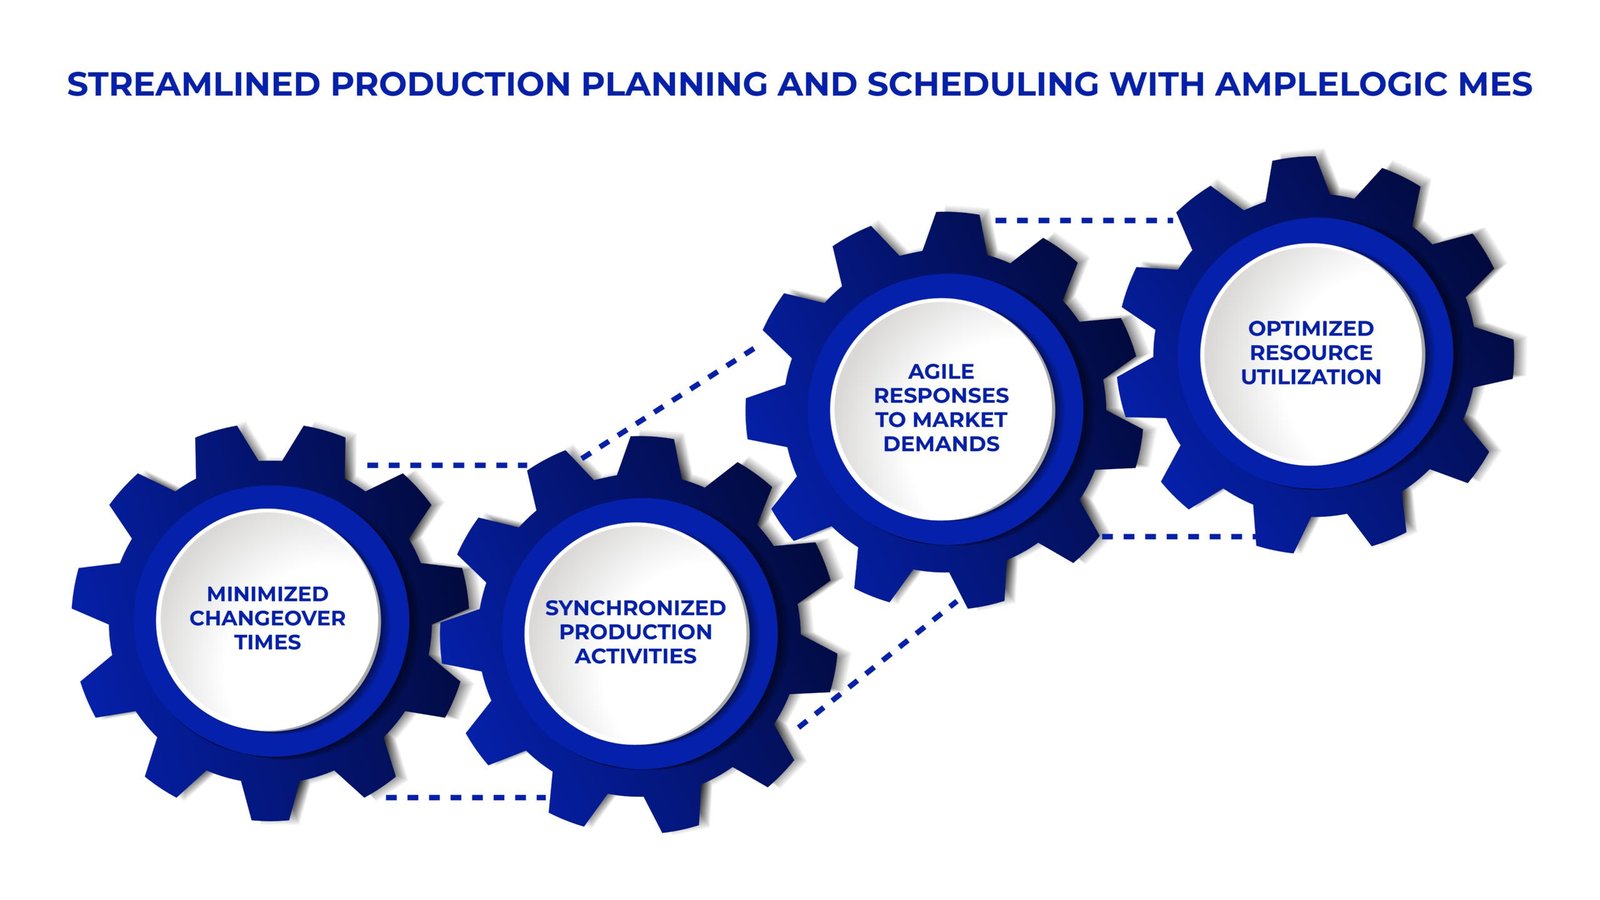 Production Planning and Scheduling with AmpleLogic MES